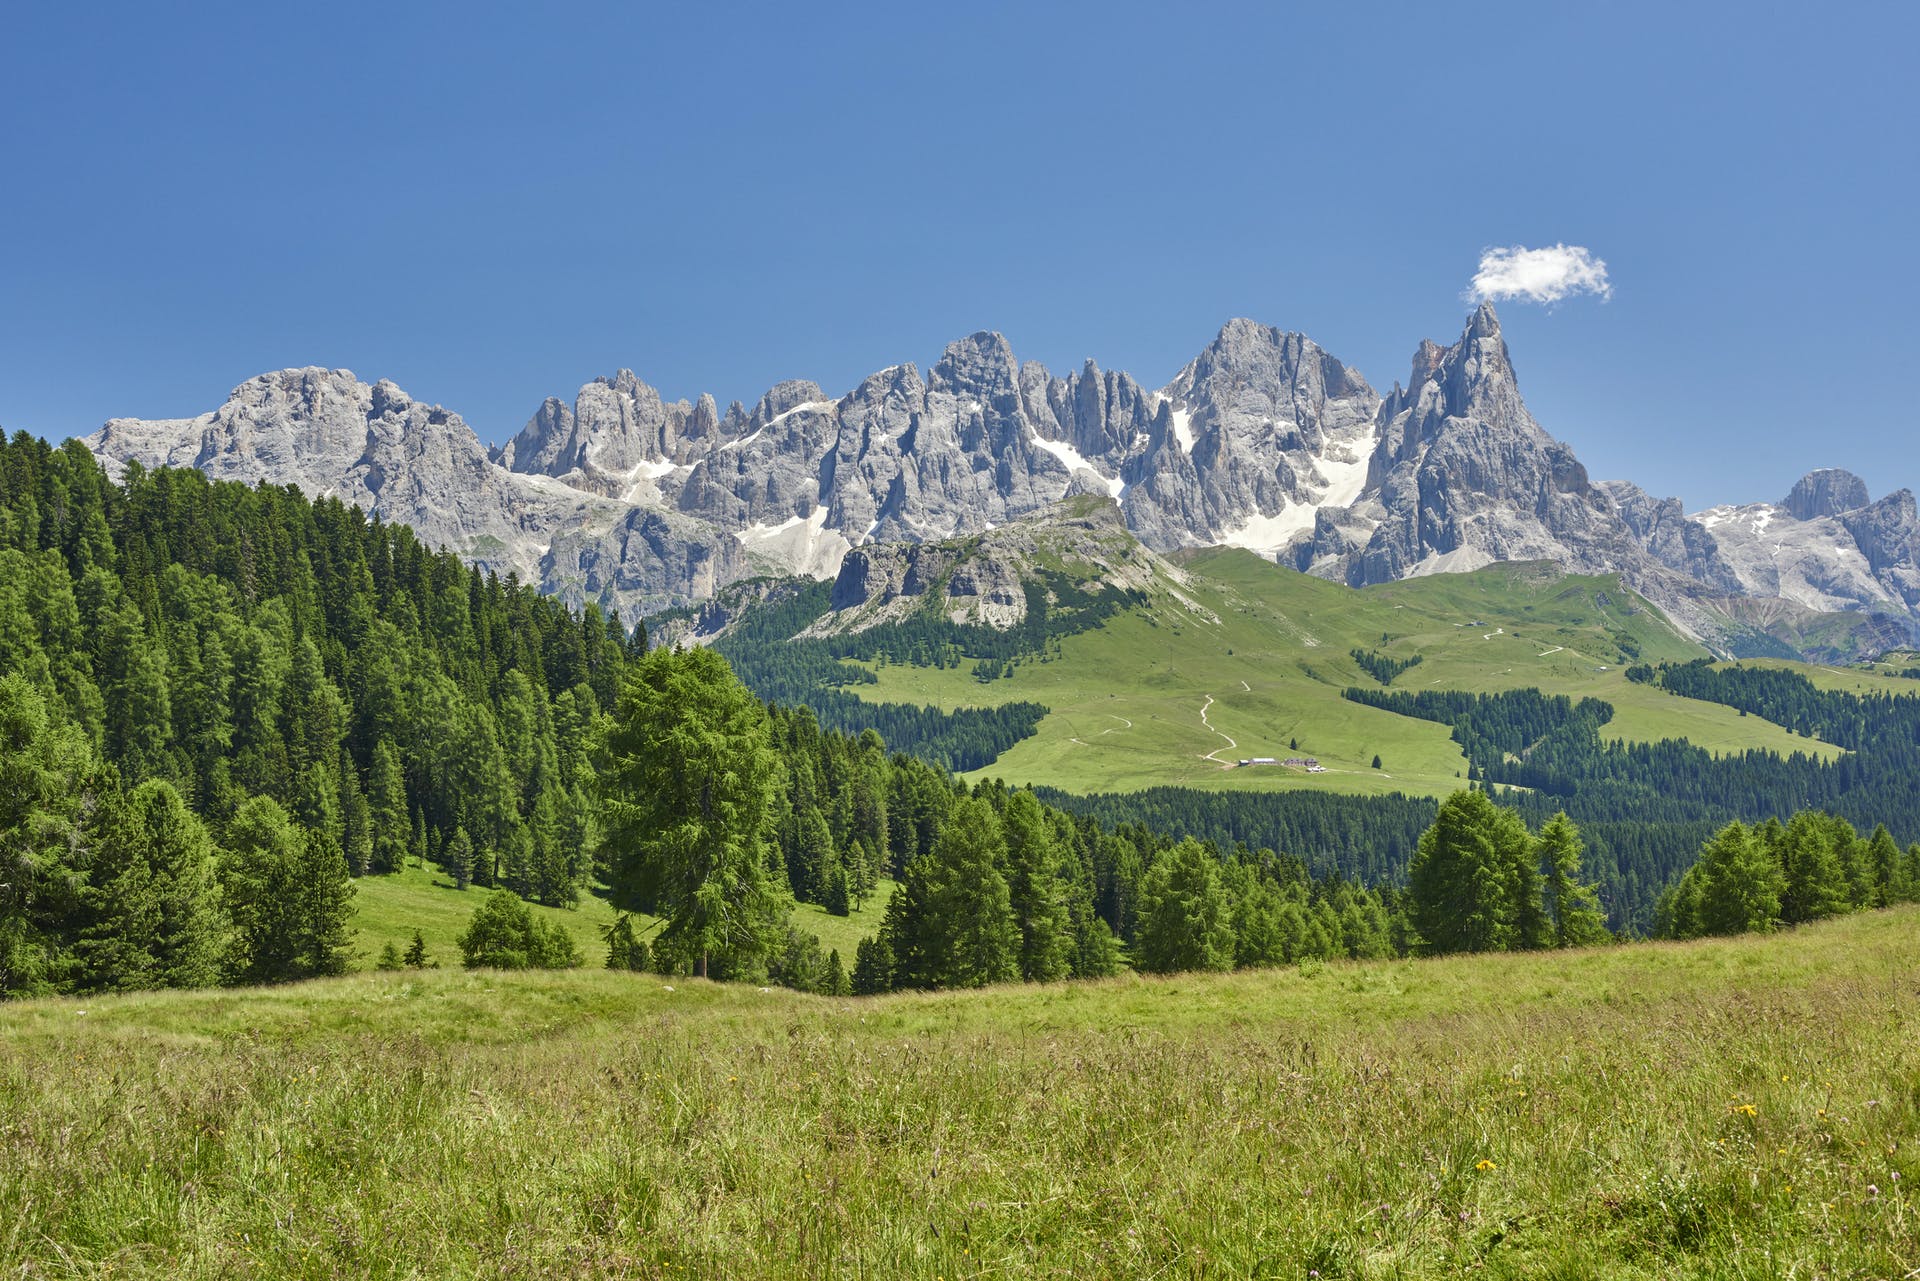 A view of the Dolomites on a sunny day.